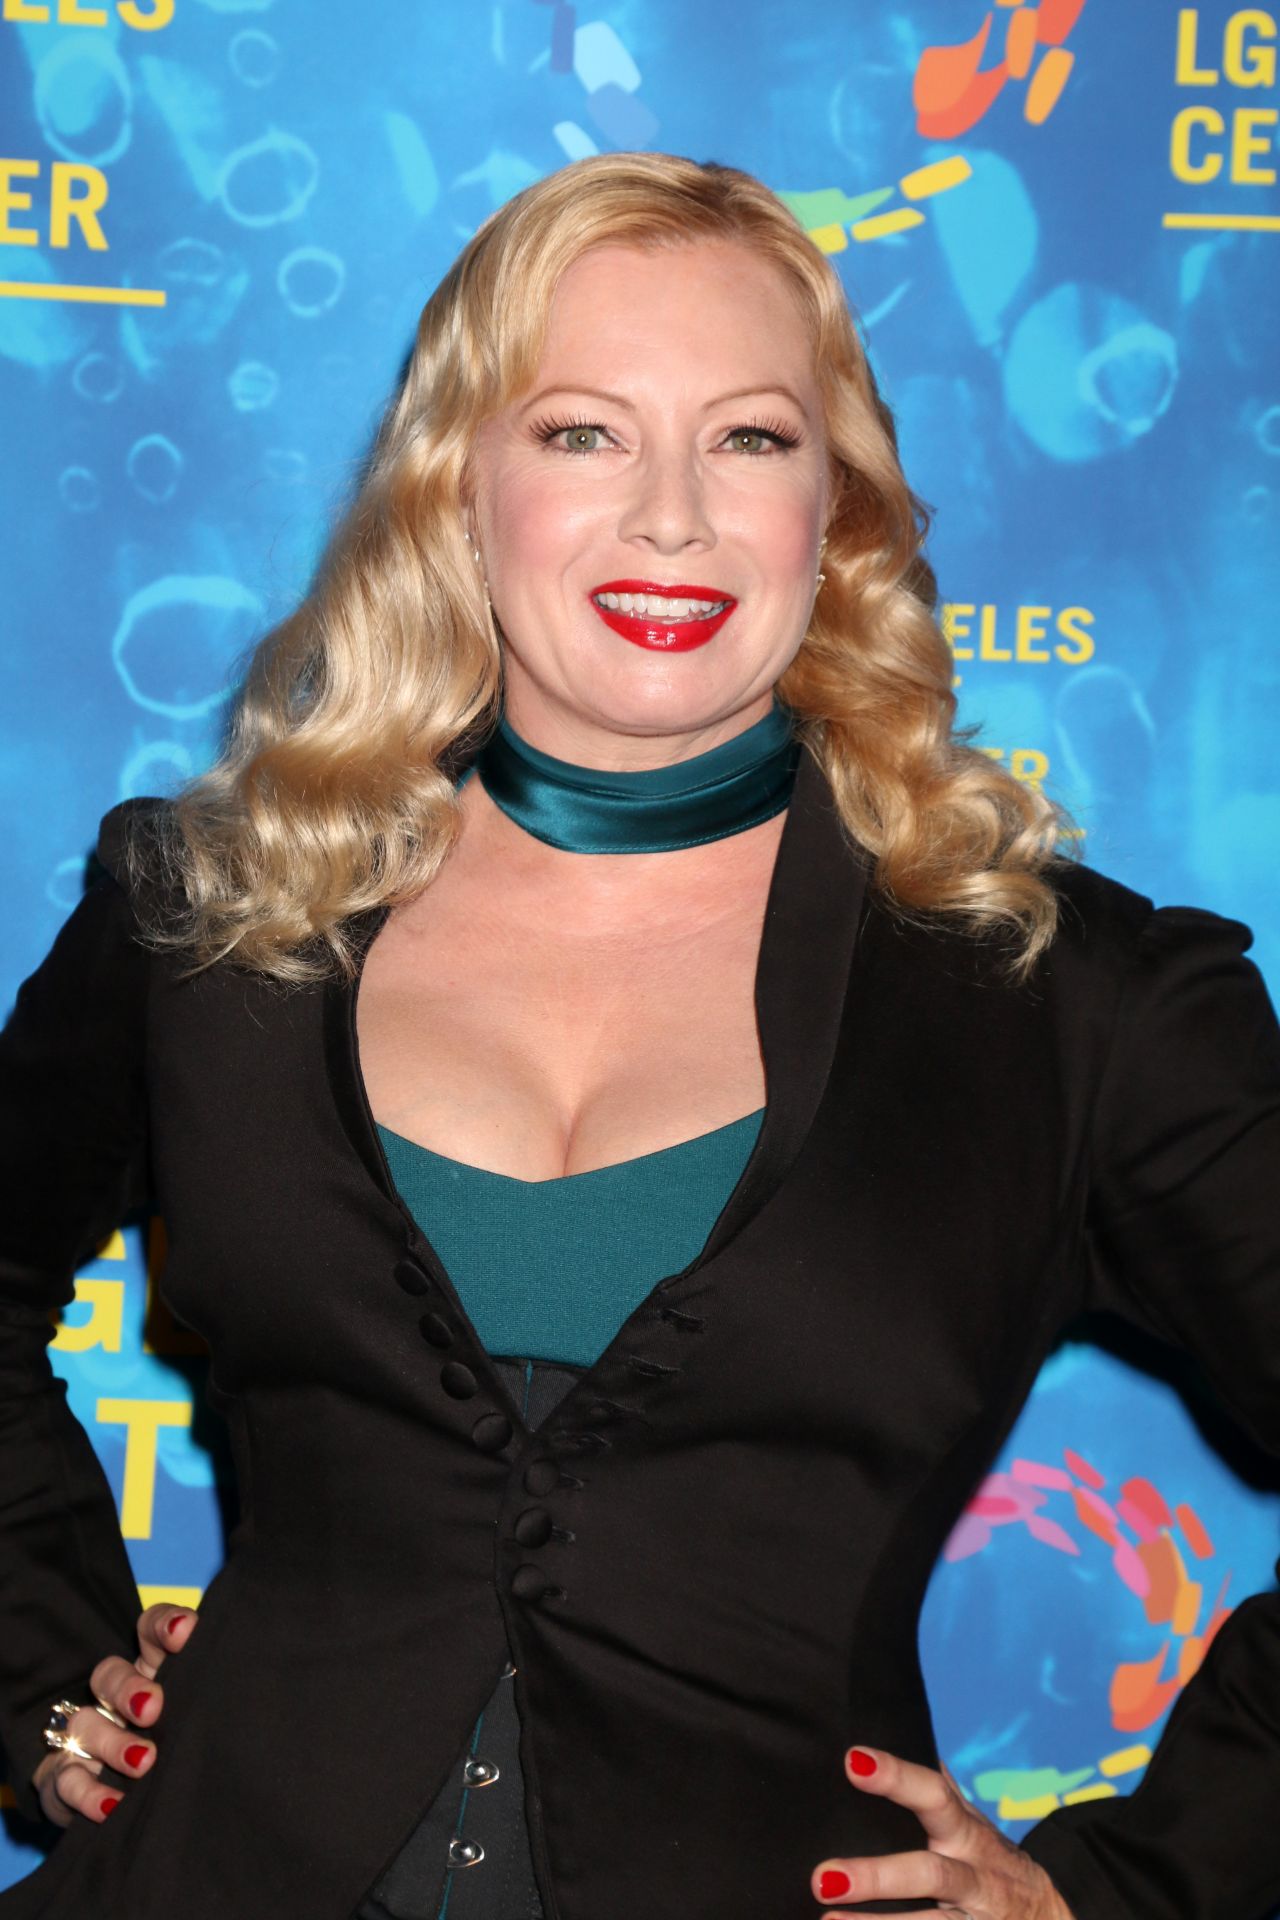 Lord pics tracy TRACI LORDS